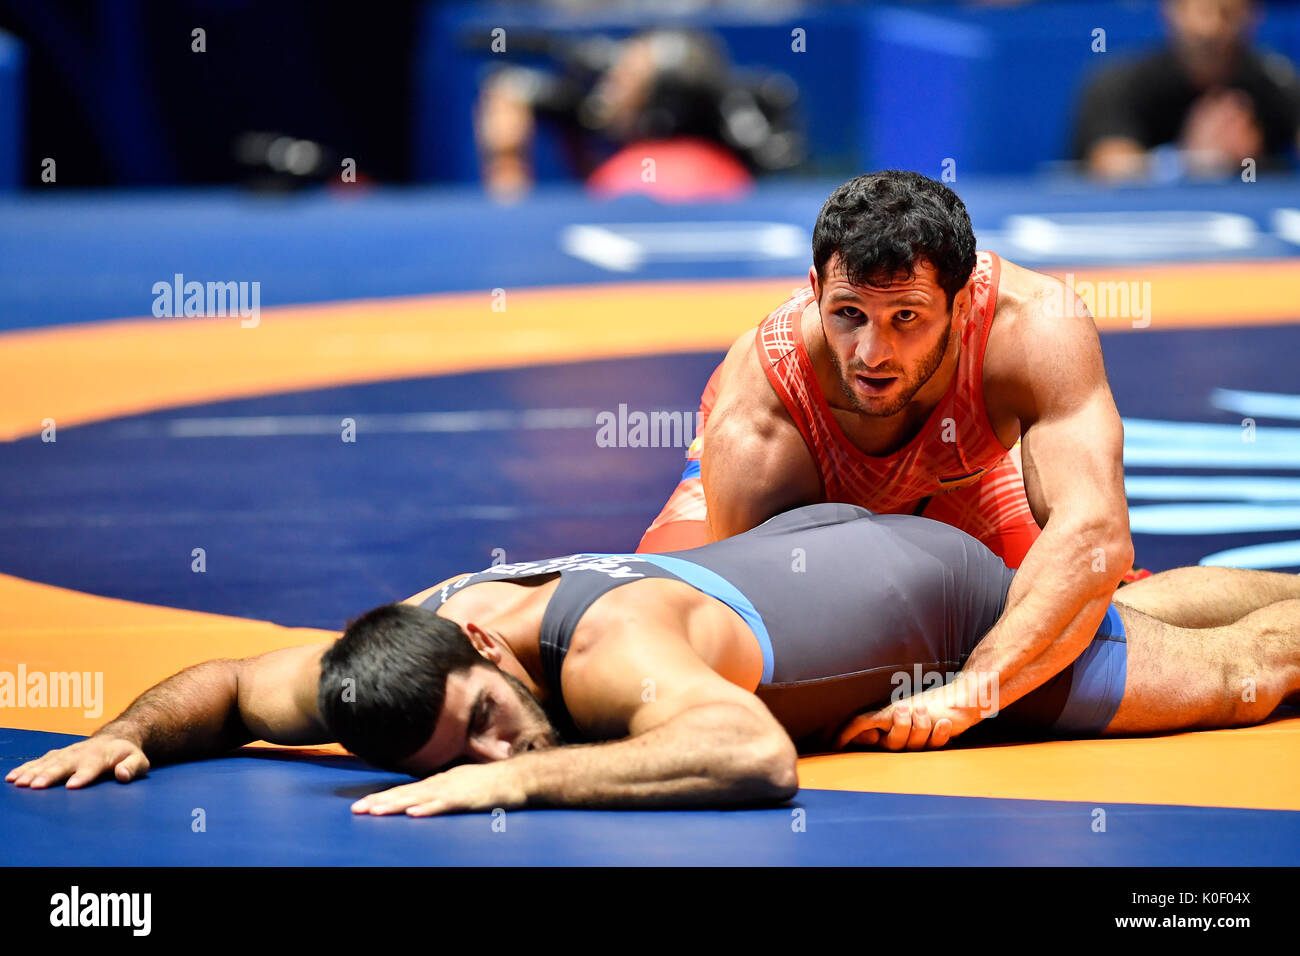 Paris, France. 22nd Aug, 2017. Maksim Manukyan (Top) of Armenia competes  with Radzik Kuliyeu of Belarus during the final match of men's 80kg  Greece-Roman wrestling of the FILA World Wrestling Championships in